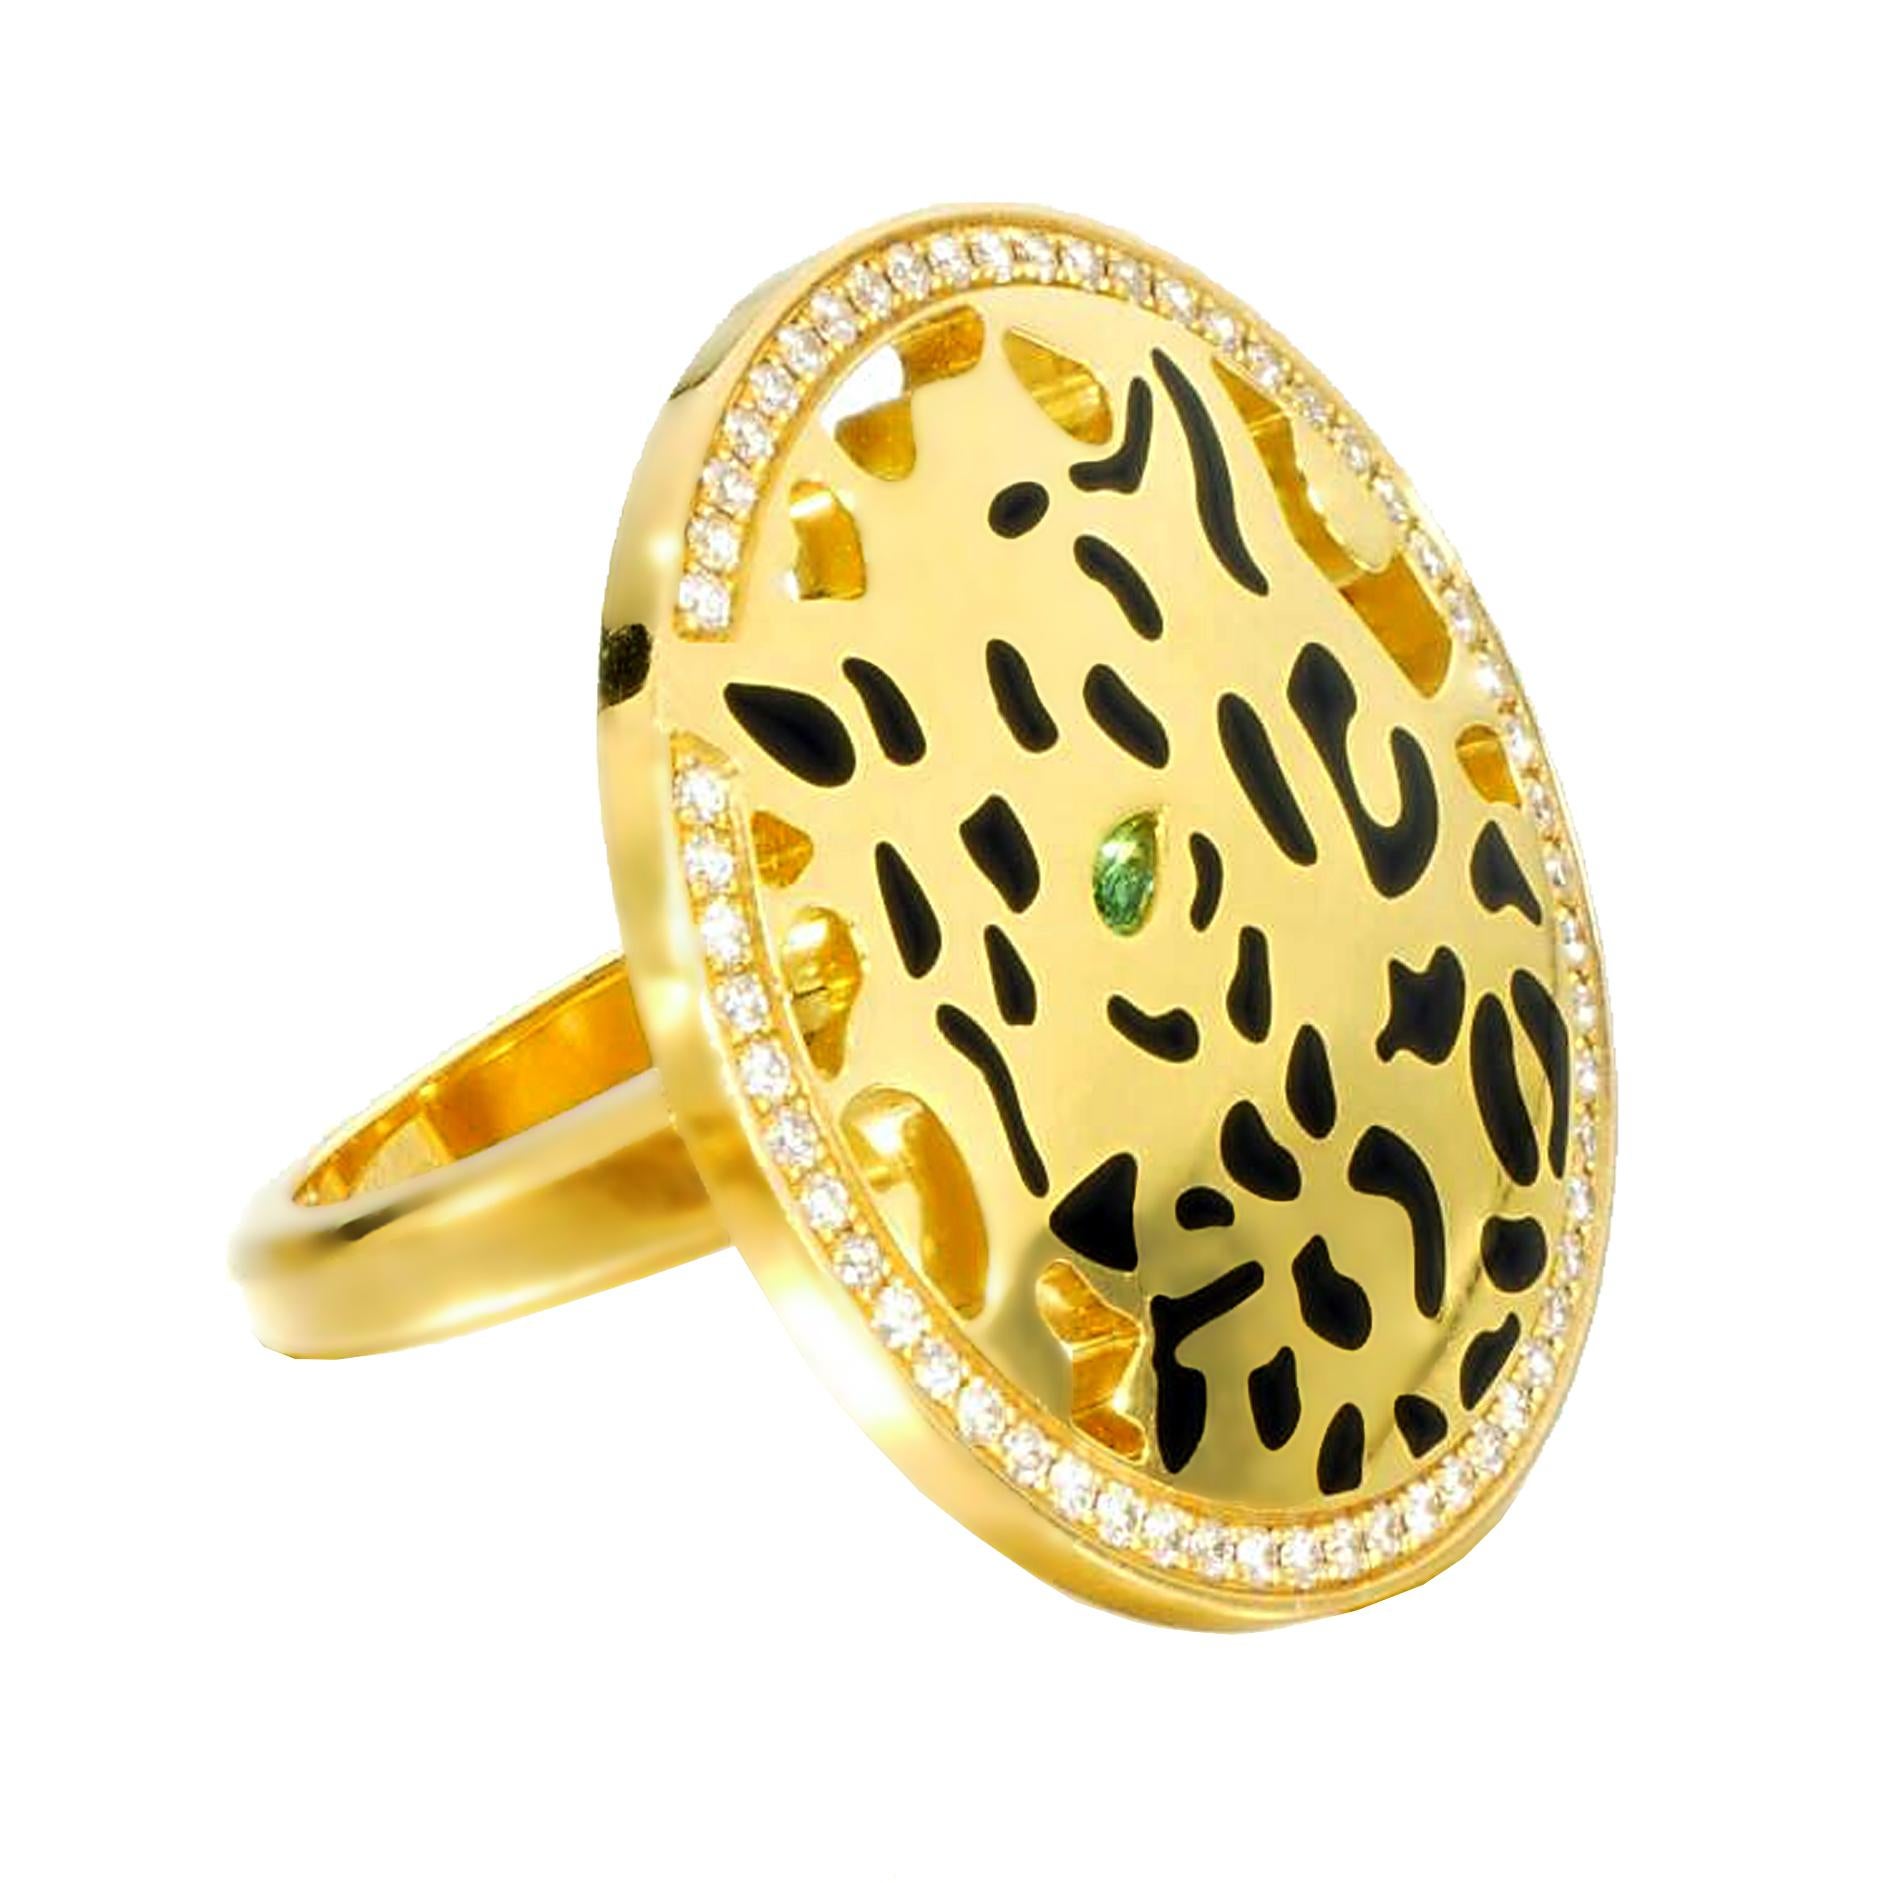 Cartier Panthere De Cartier Yellow Gold Diamond Ring In Excellent Condition For Sale In Feasterville, PA